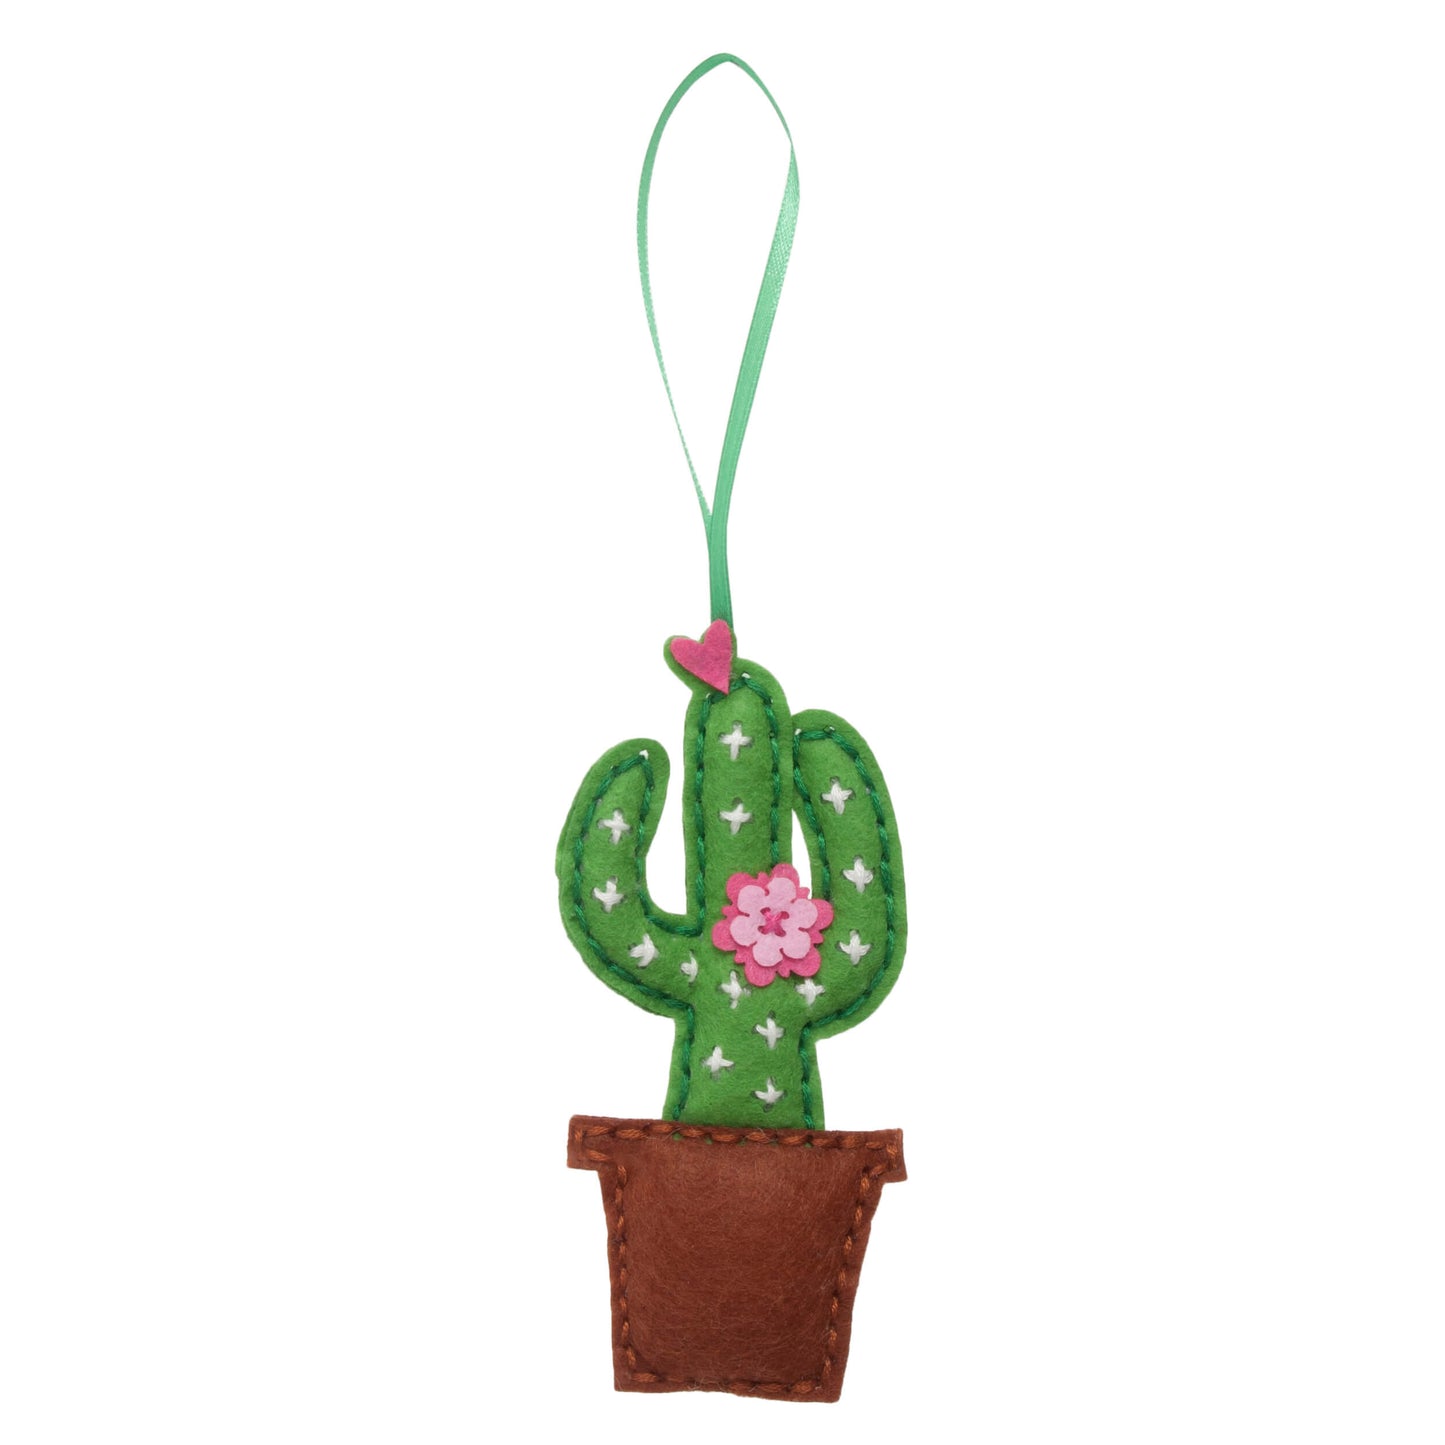 The image shows a felt cactus ornament in a pot with a pink flower on a green ribbon hanging from it